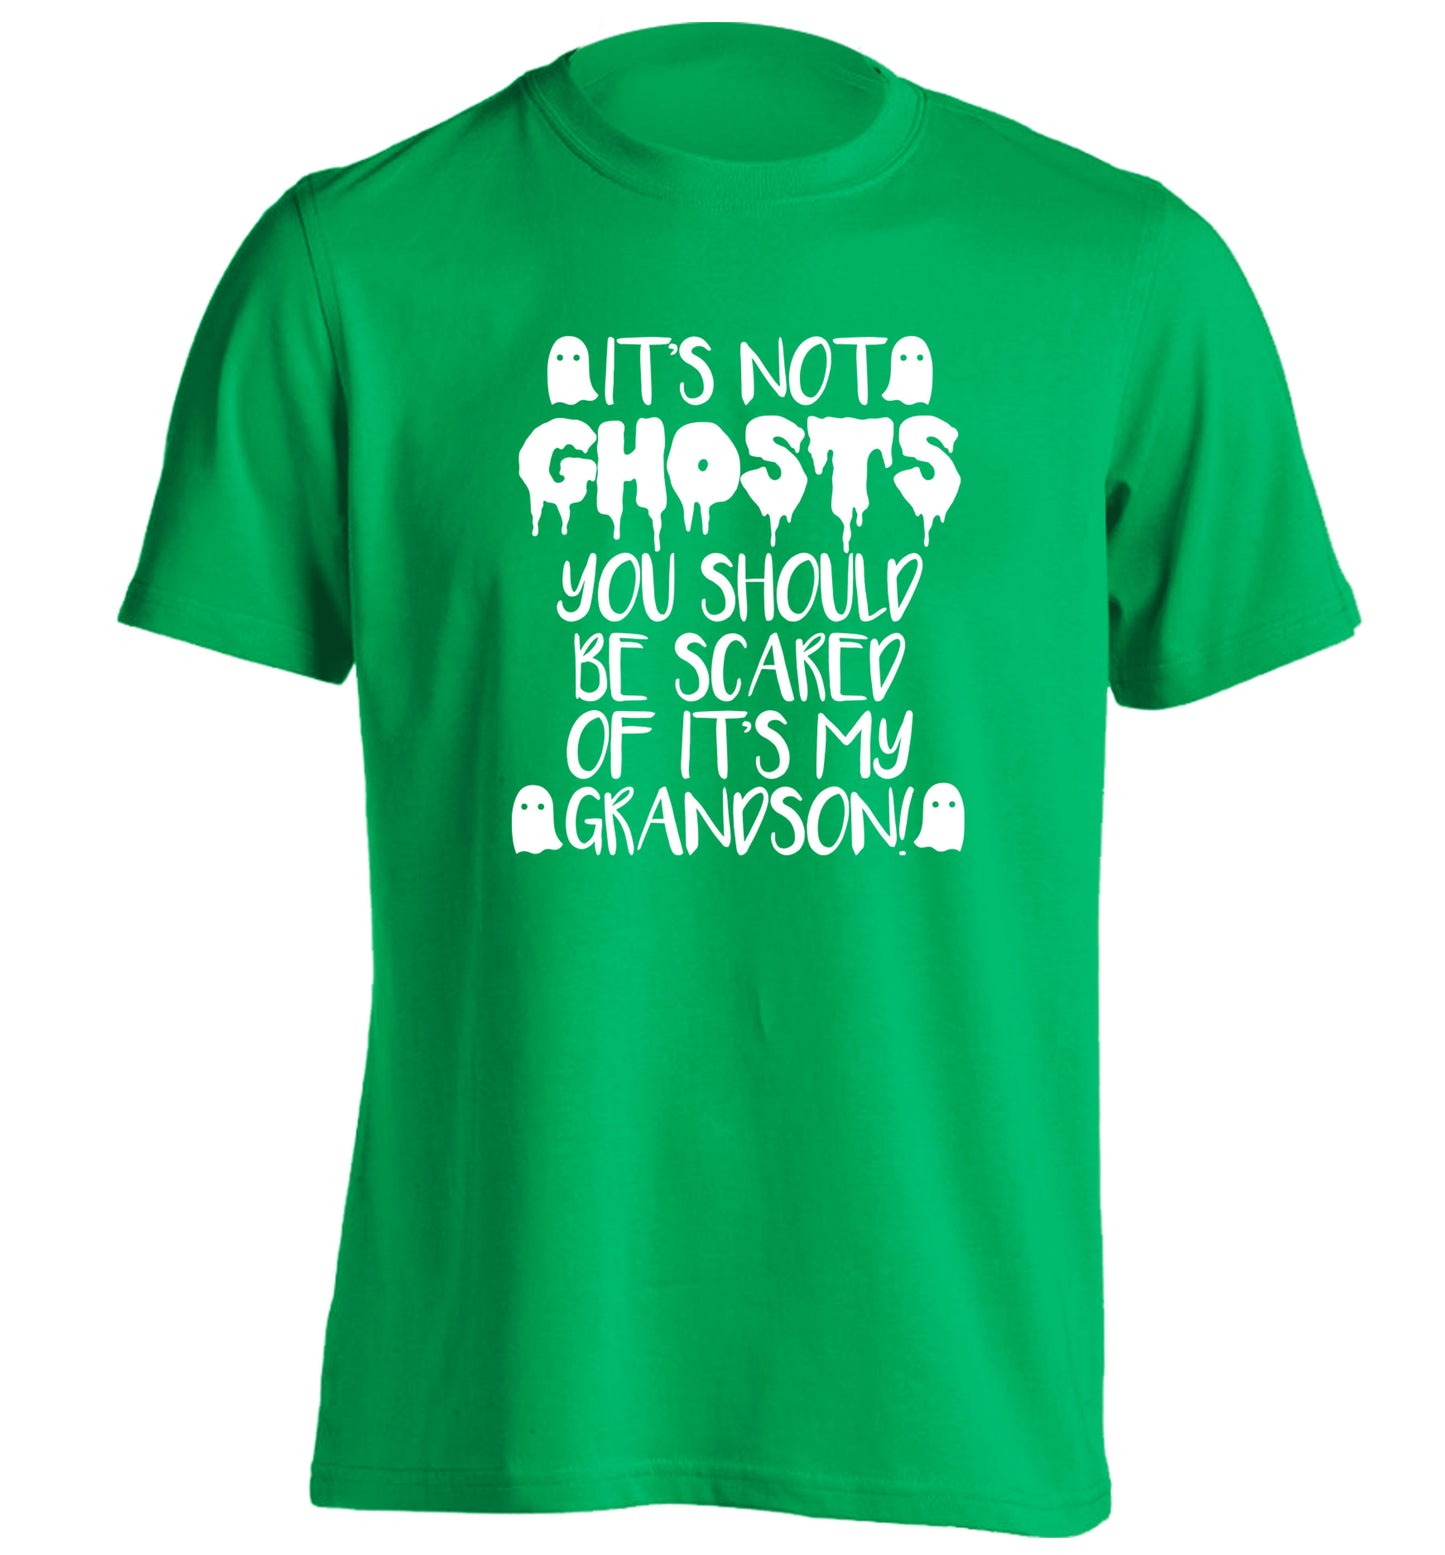 It's not ghosts you should be scared of it's my grandson! adults unisex green Tshirt 2XL